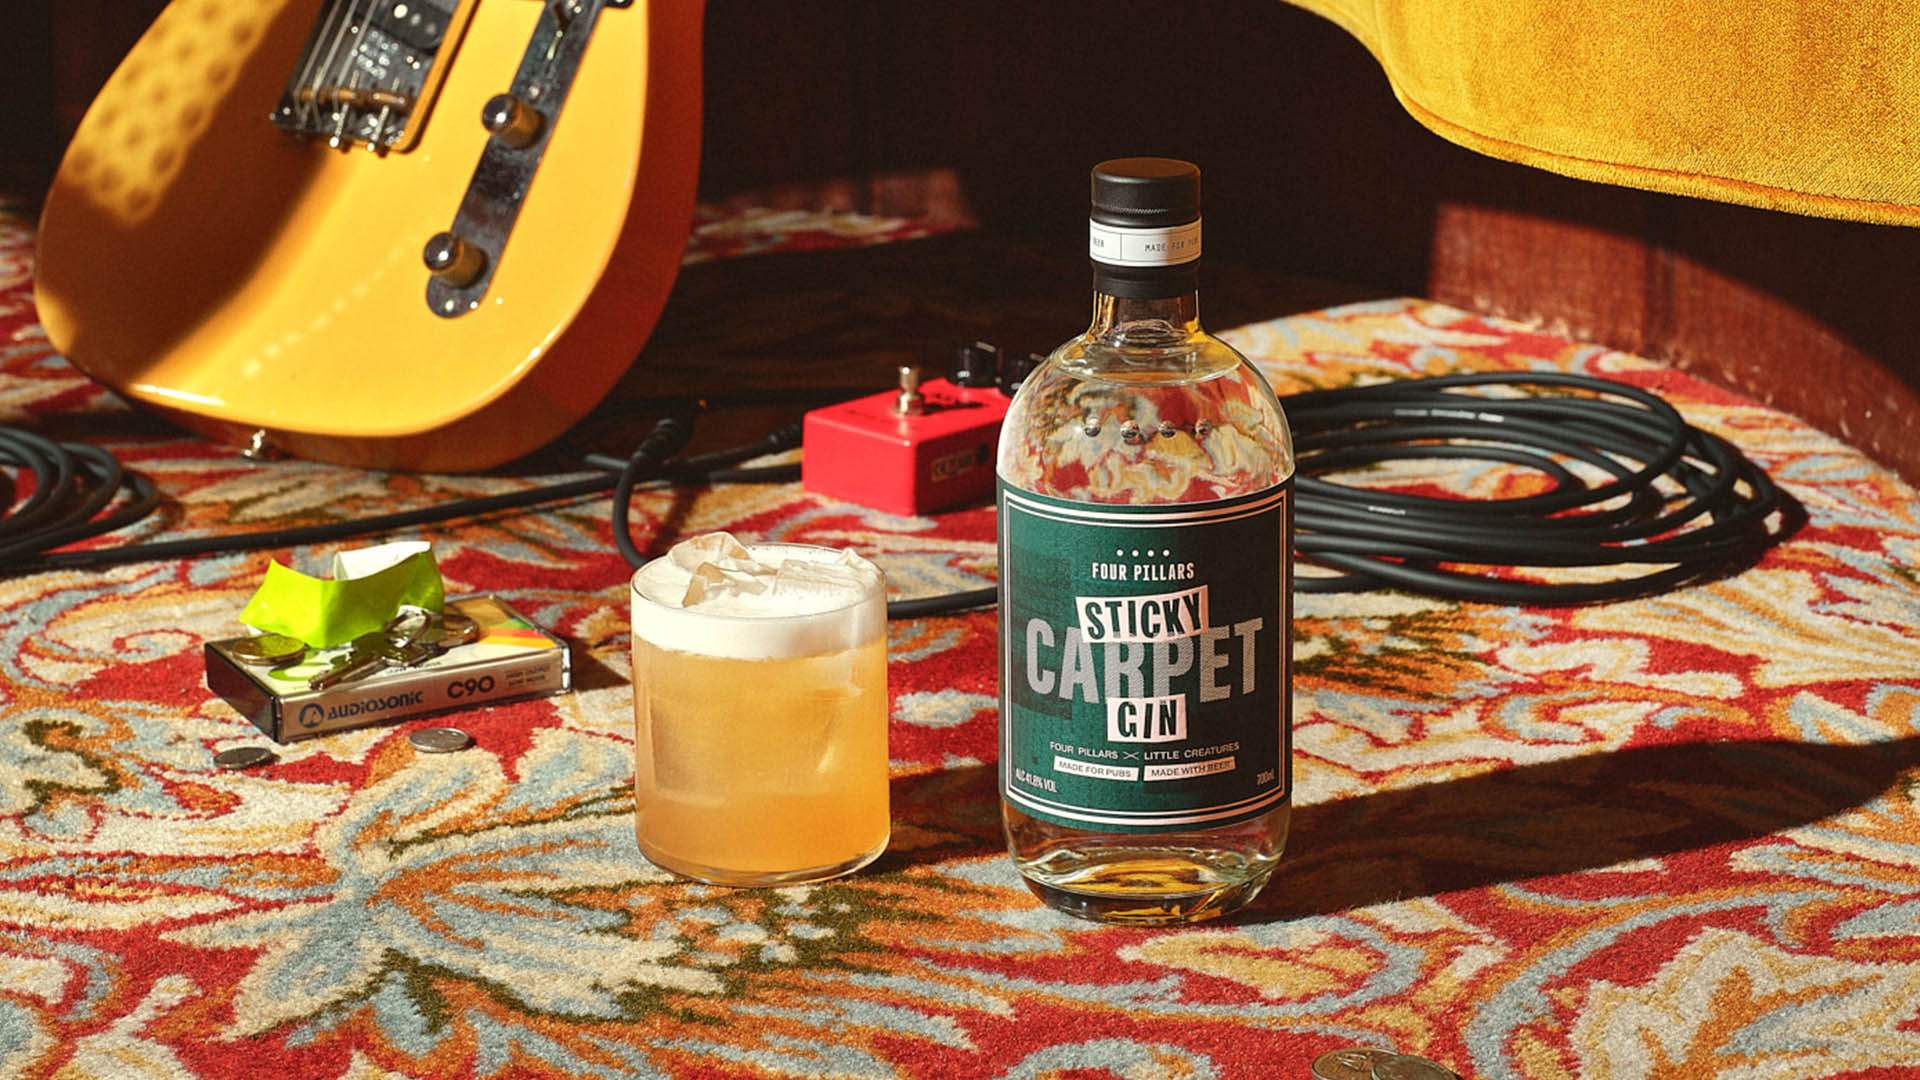 Four Pillars Has Brought Back Its Sticky Carpet Gin That Pays Boozy Tribute to the Front Bars in Pubs